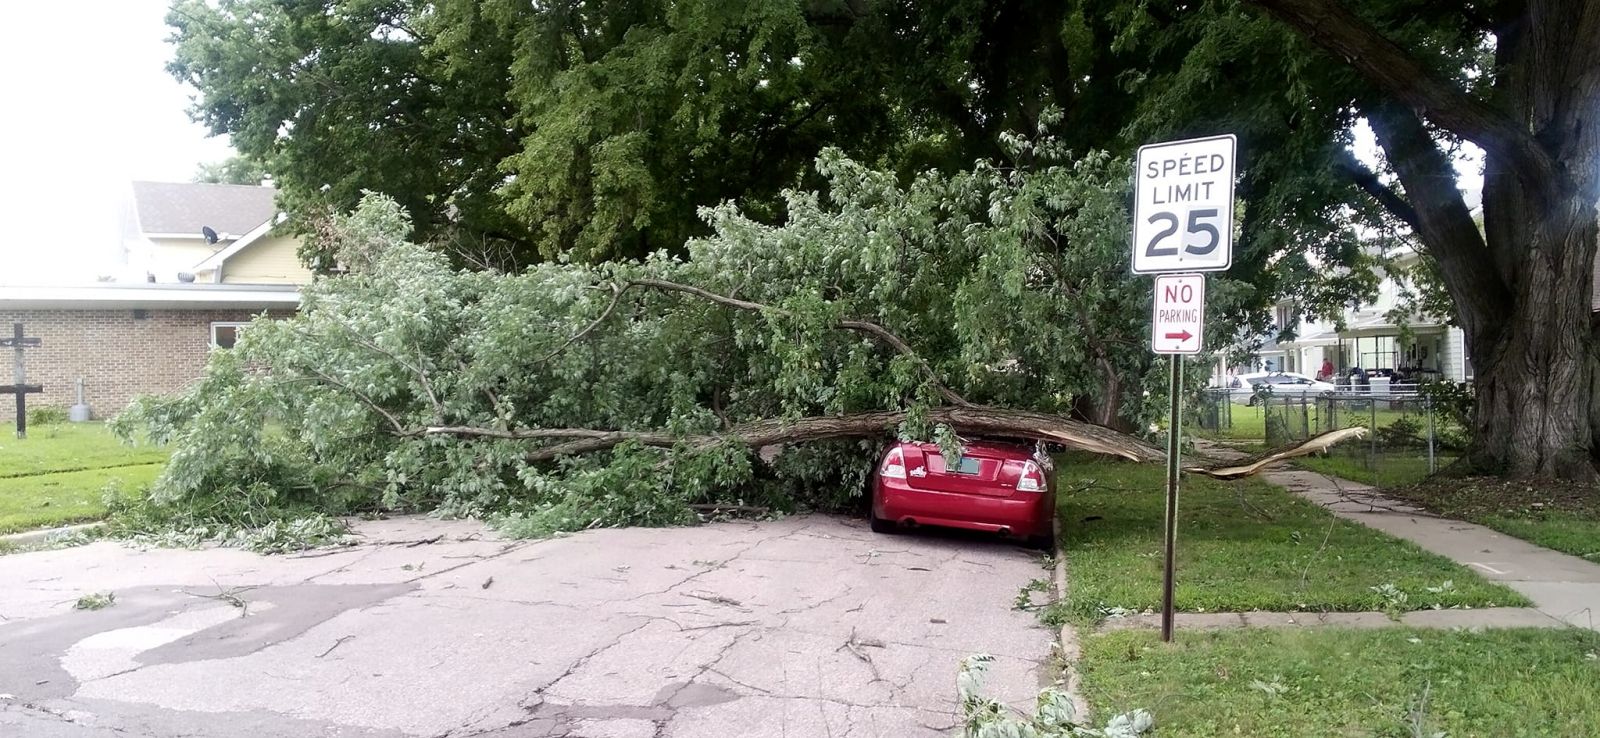 Photo of a large tree branch snapped and laying on a car and across the width of the street in Sioux City, Iowa